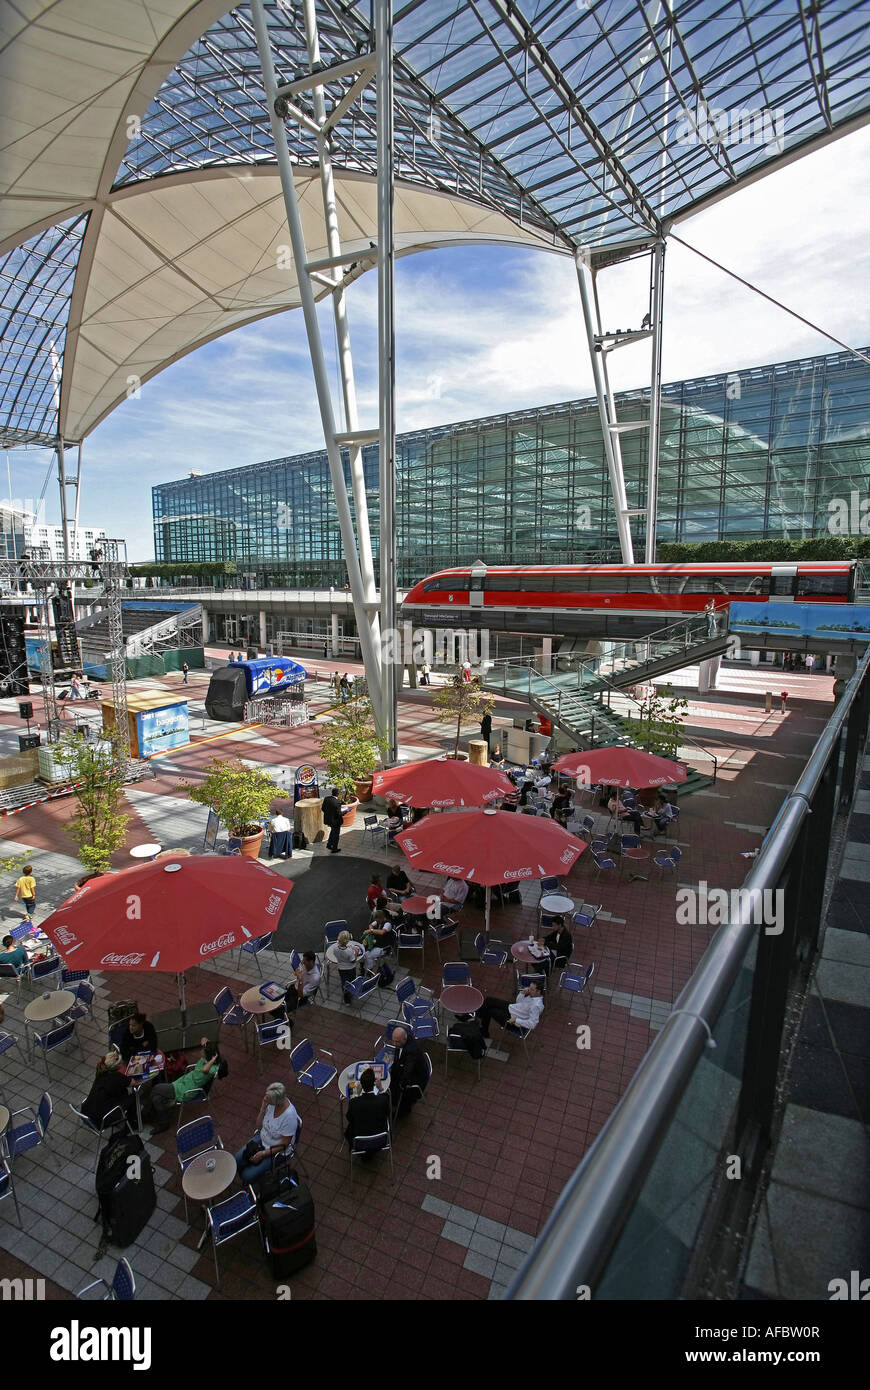 Illustration Airport Terminal 2: Cafe at Munich Airport building with futuristic architecture Stock Photo